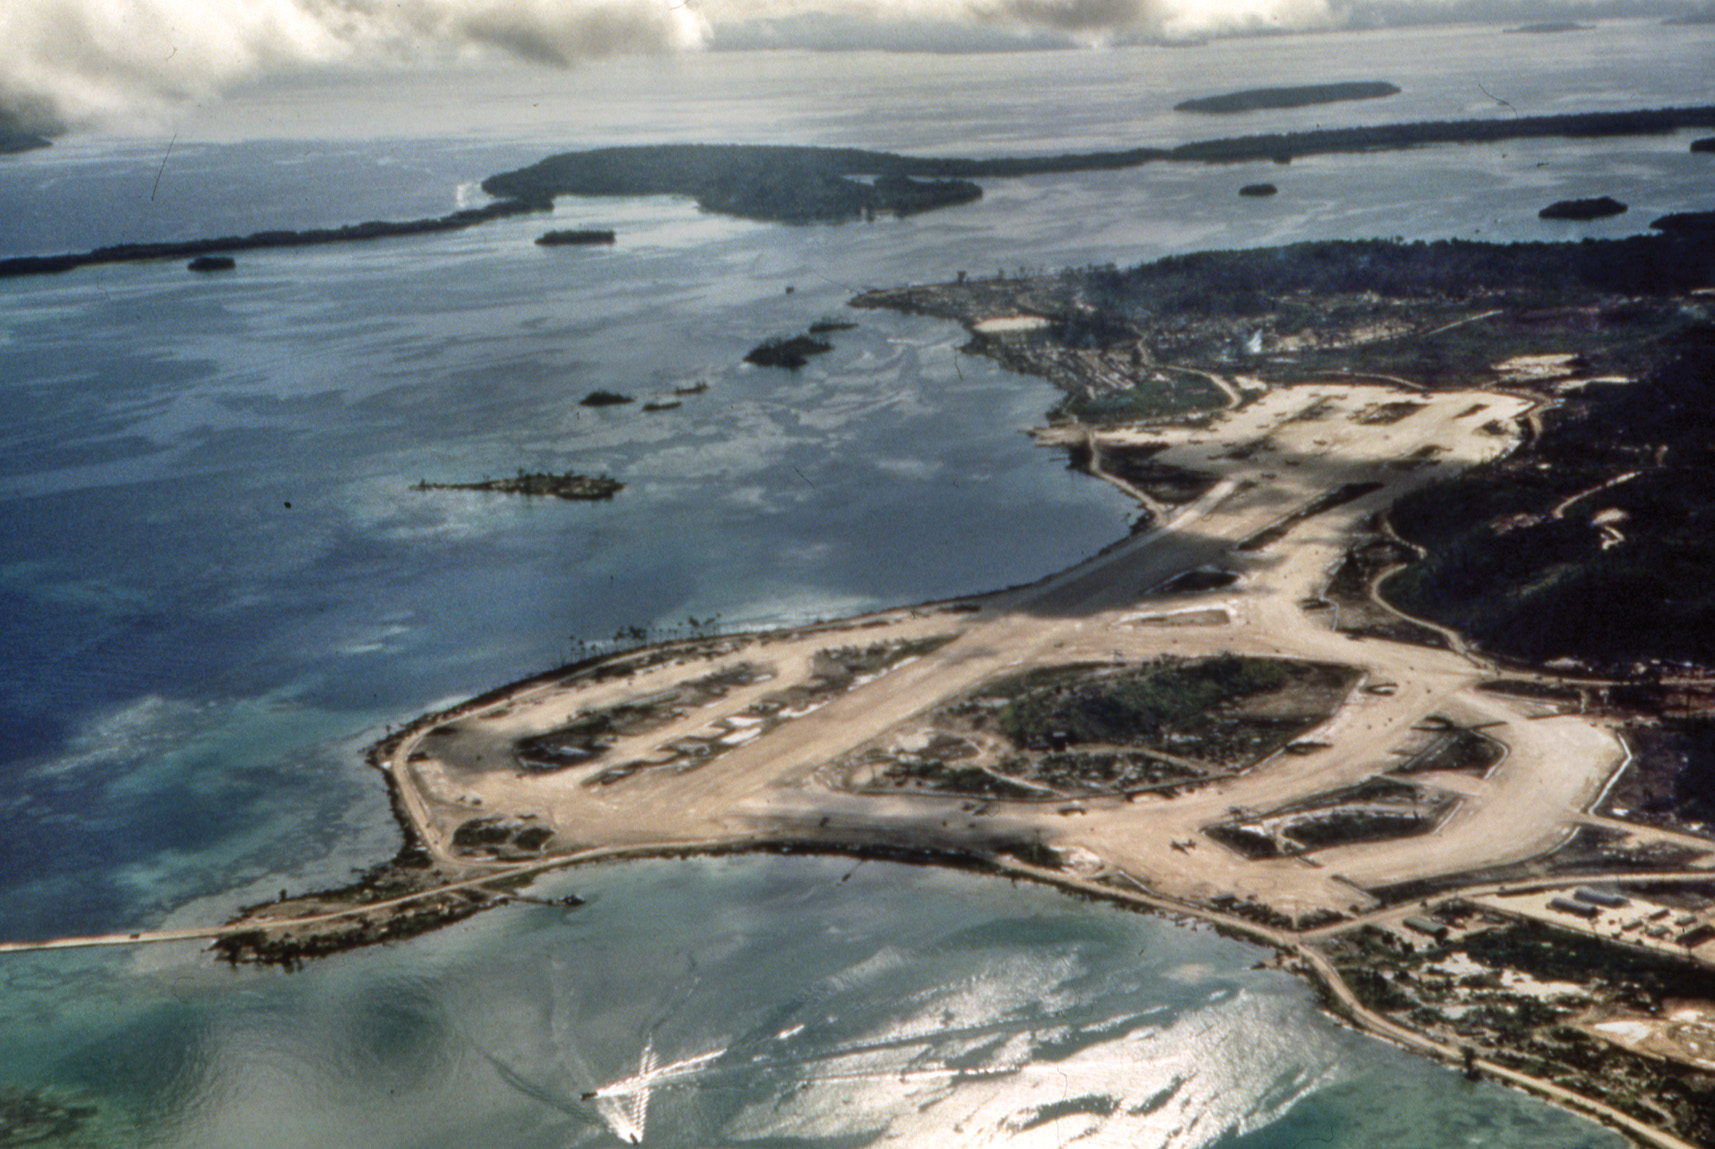 View of Munda airfield. After the war, it was expanded and today is a commercial airport used by regional airlines.